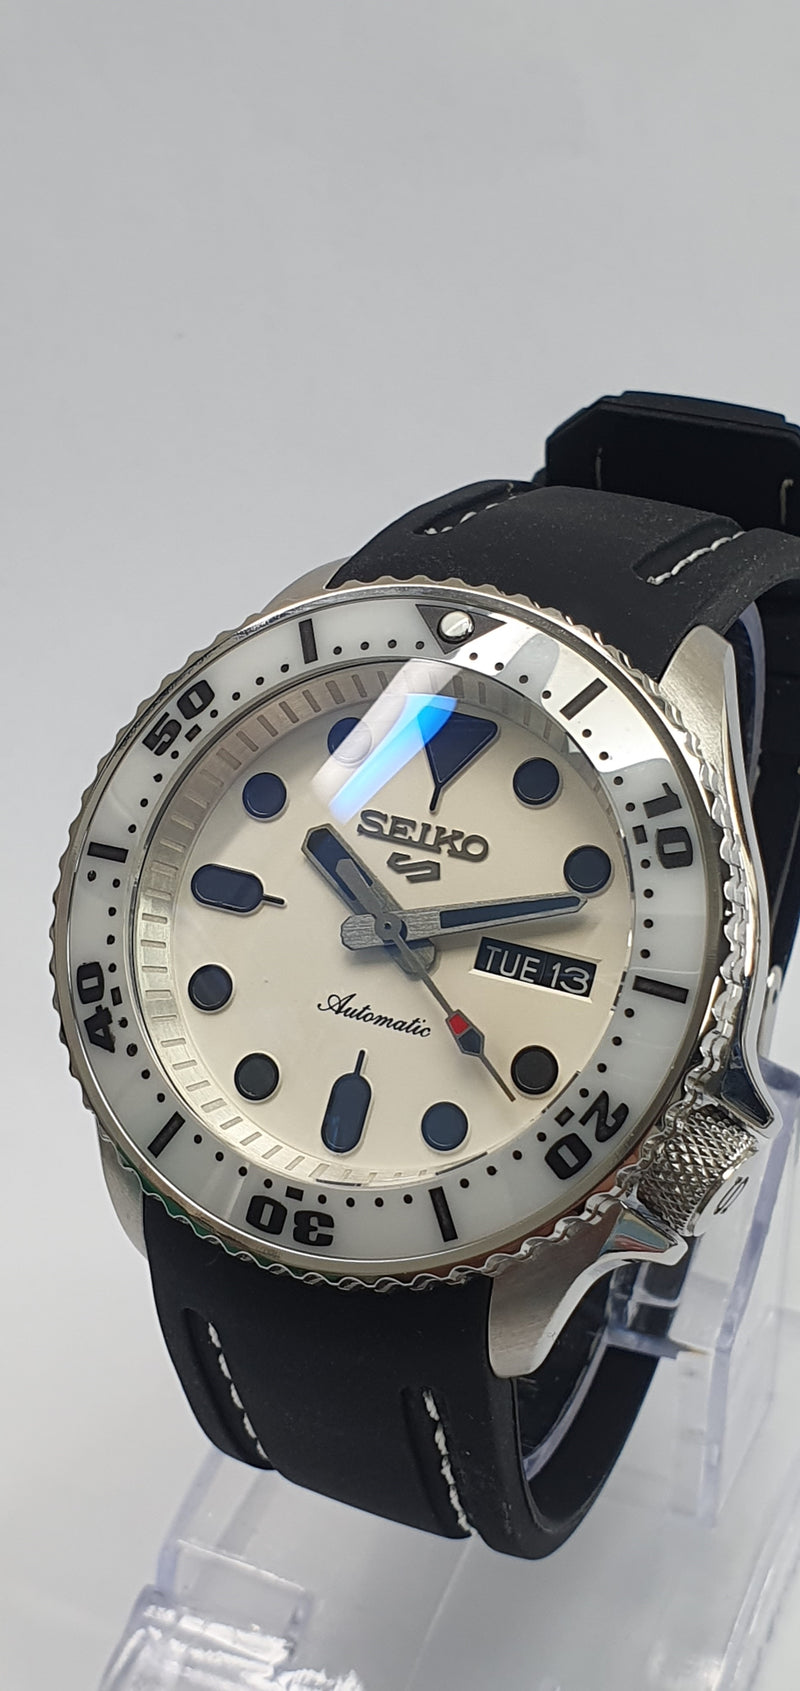 Bespoke Custom Build WHITE GHOST Mod' SKX007 Divers Watch NH36 Automatic Divers Watch 5ATM